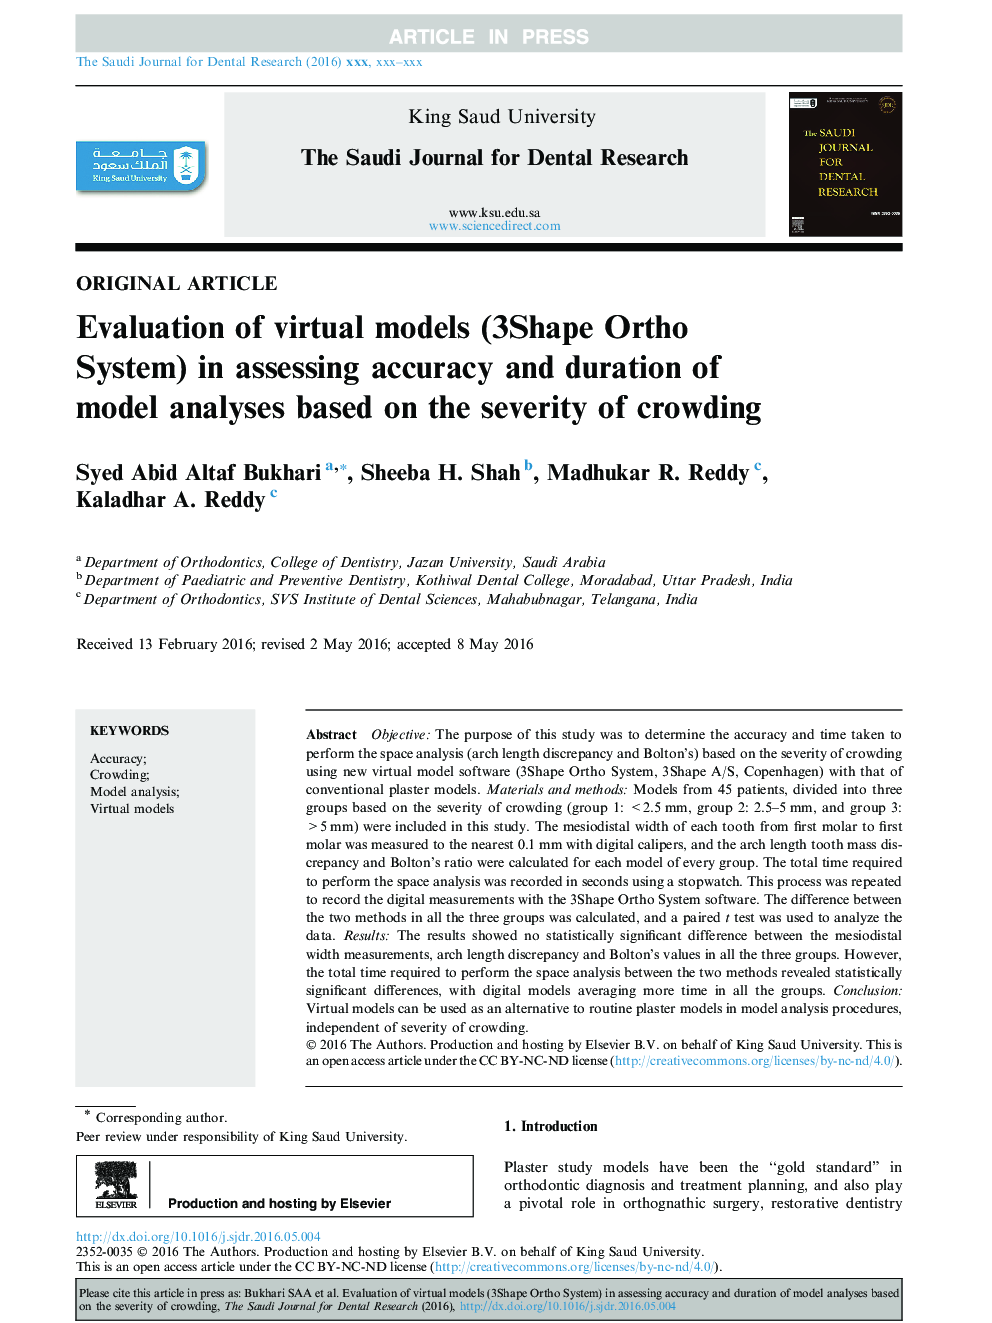 Evaluation of virtual models (3Shape Ortho System) in assessing accuracy and duration of model analyses based on the severity of crowding